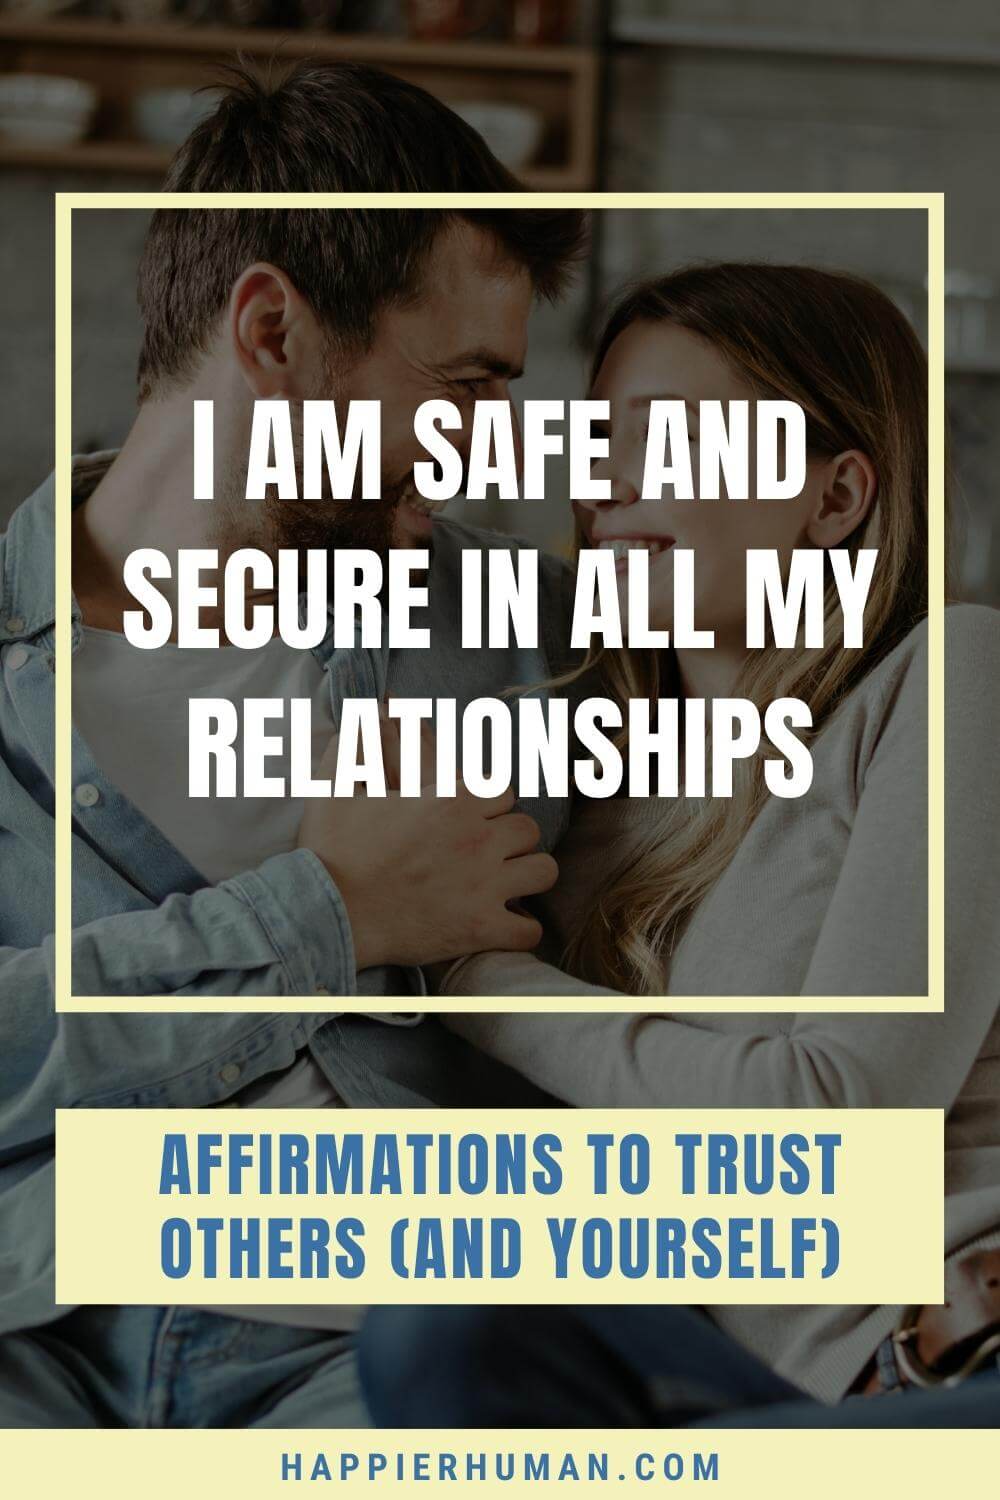 Affirmations For Trust - I am safe and secure in all my relationships | surrender affirmations | affirmations for trust in relationships | affirmations for trusting the process